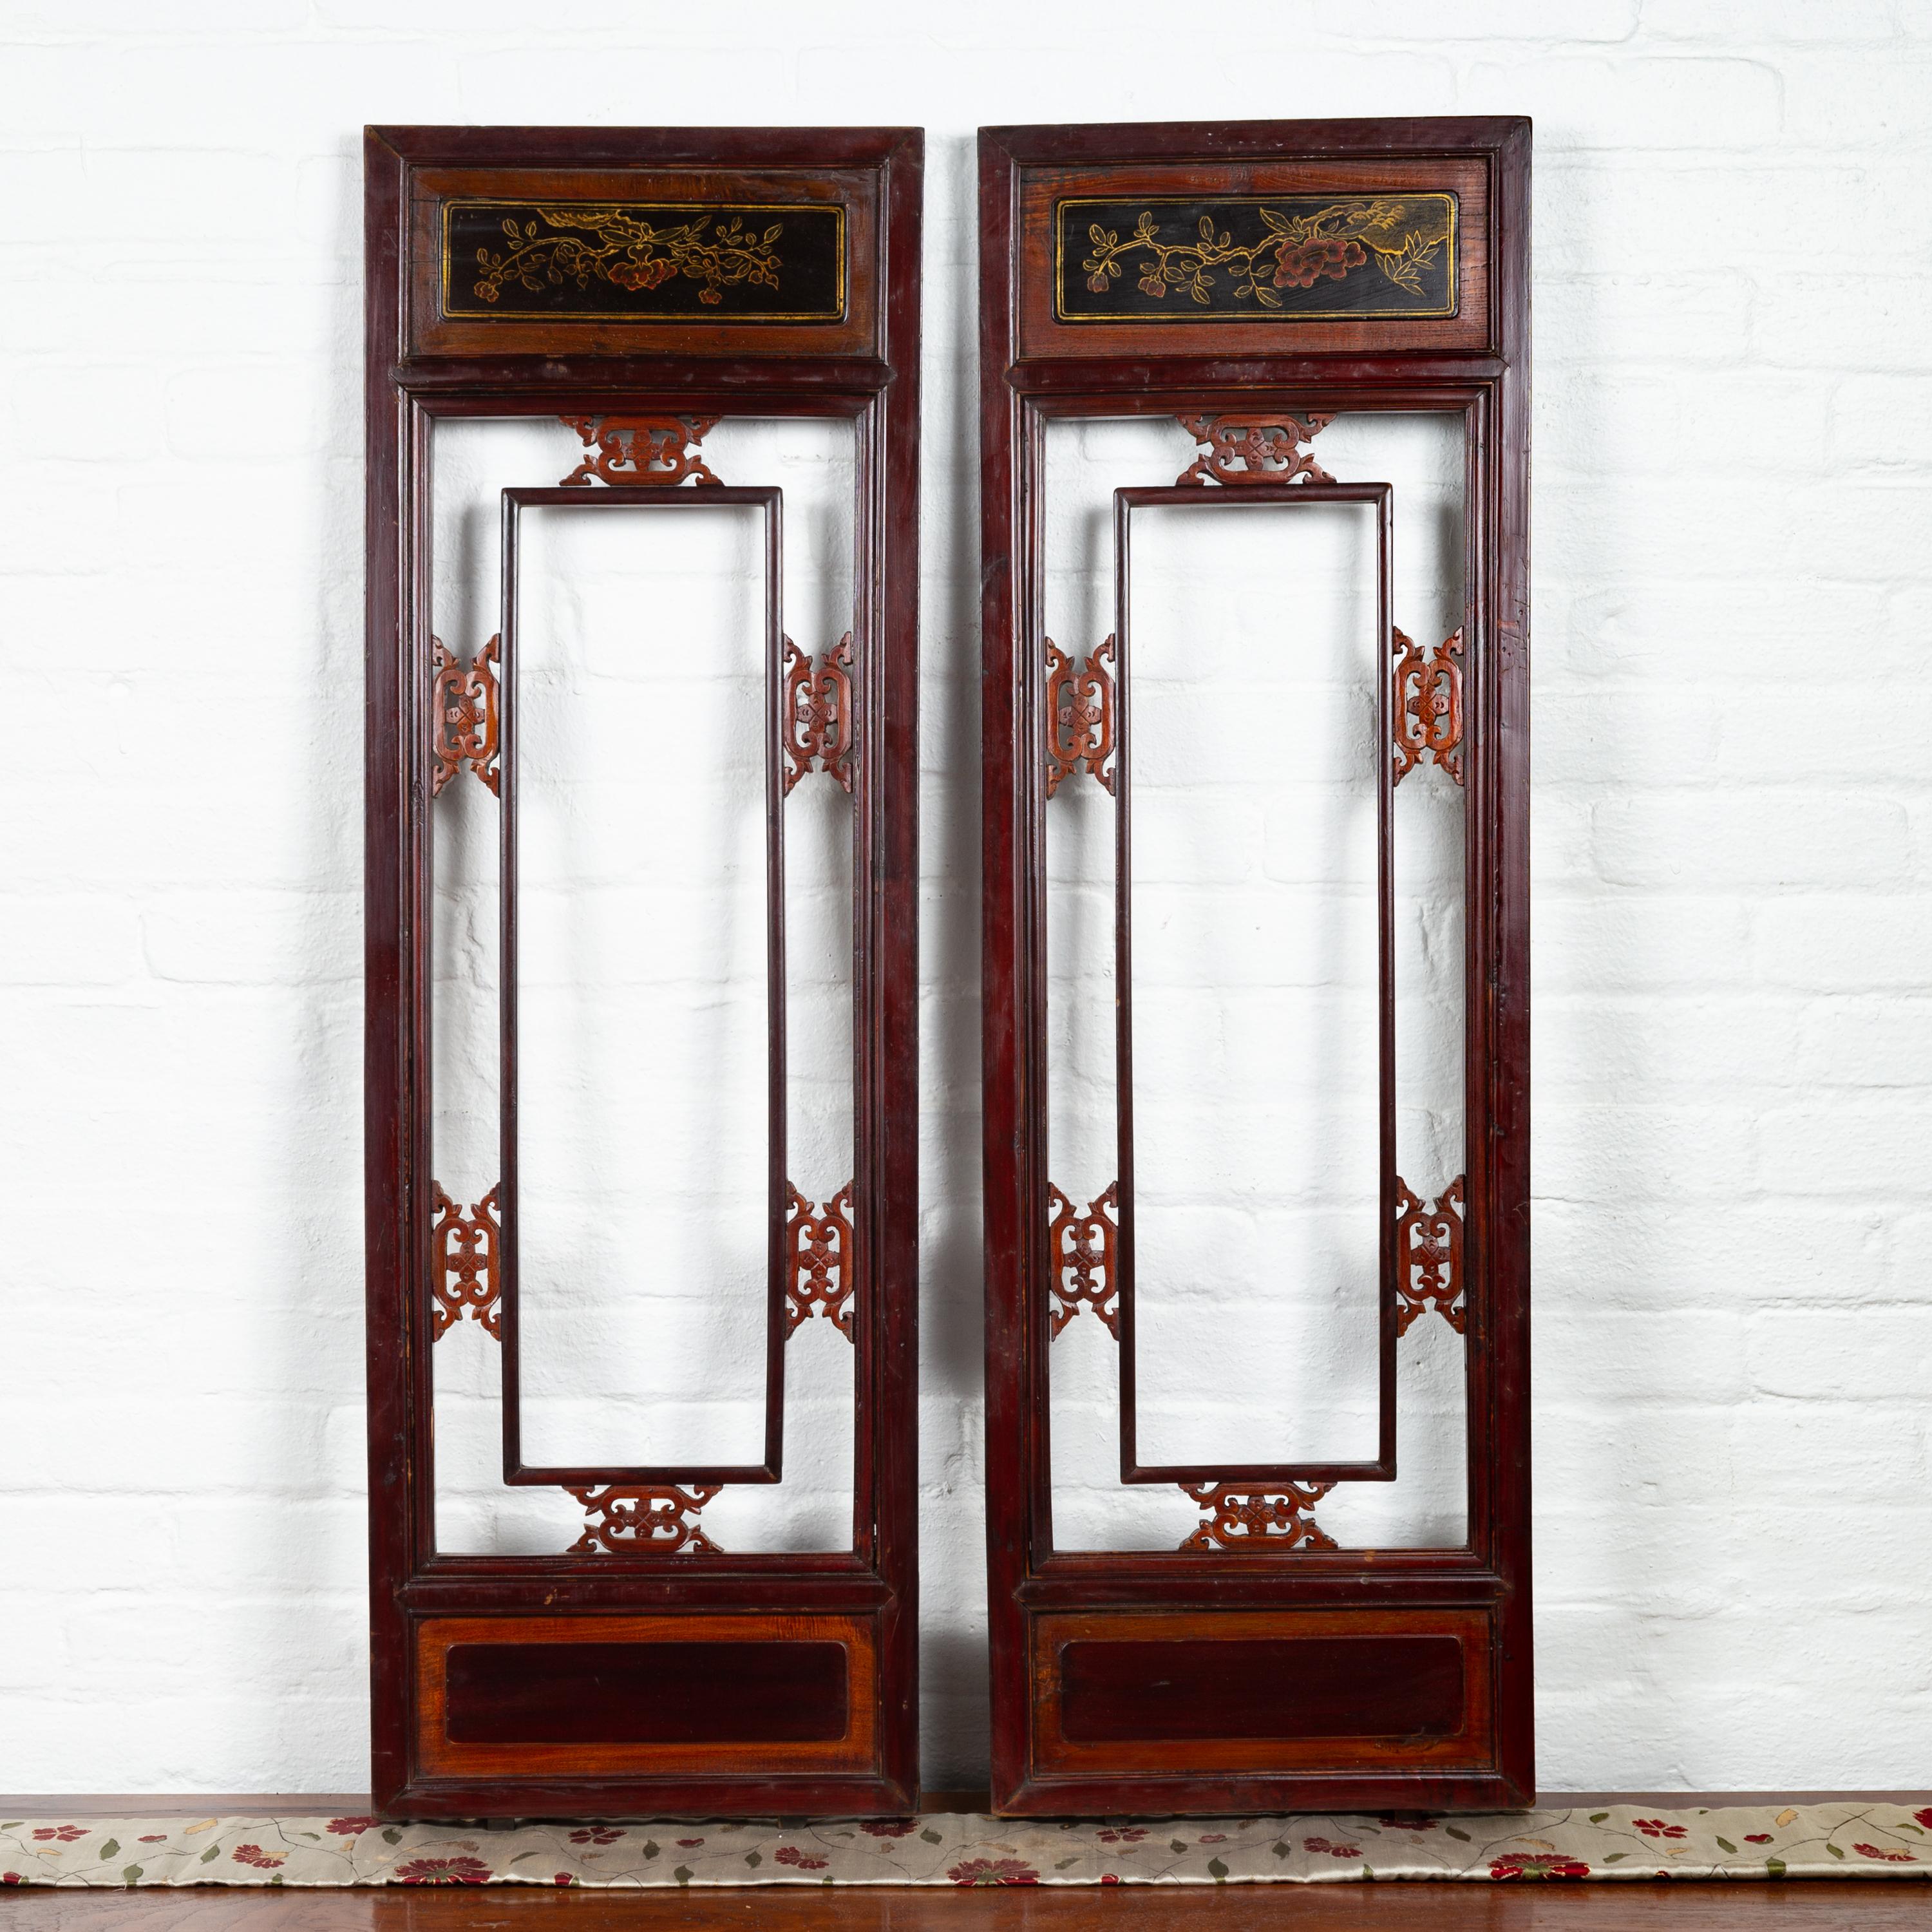 A pair of Chinese antique carved wooden panels from the early 20th century, with red and brown patina and golden accents. Born in China during the early years of the 20th century, each of these decorative panels features a reddish brown colored